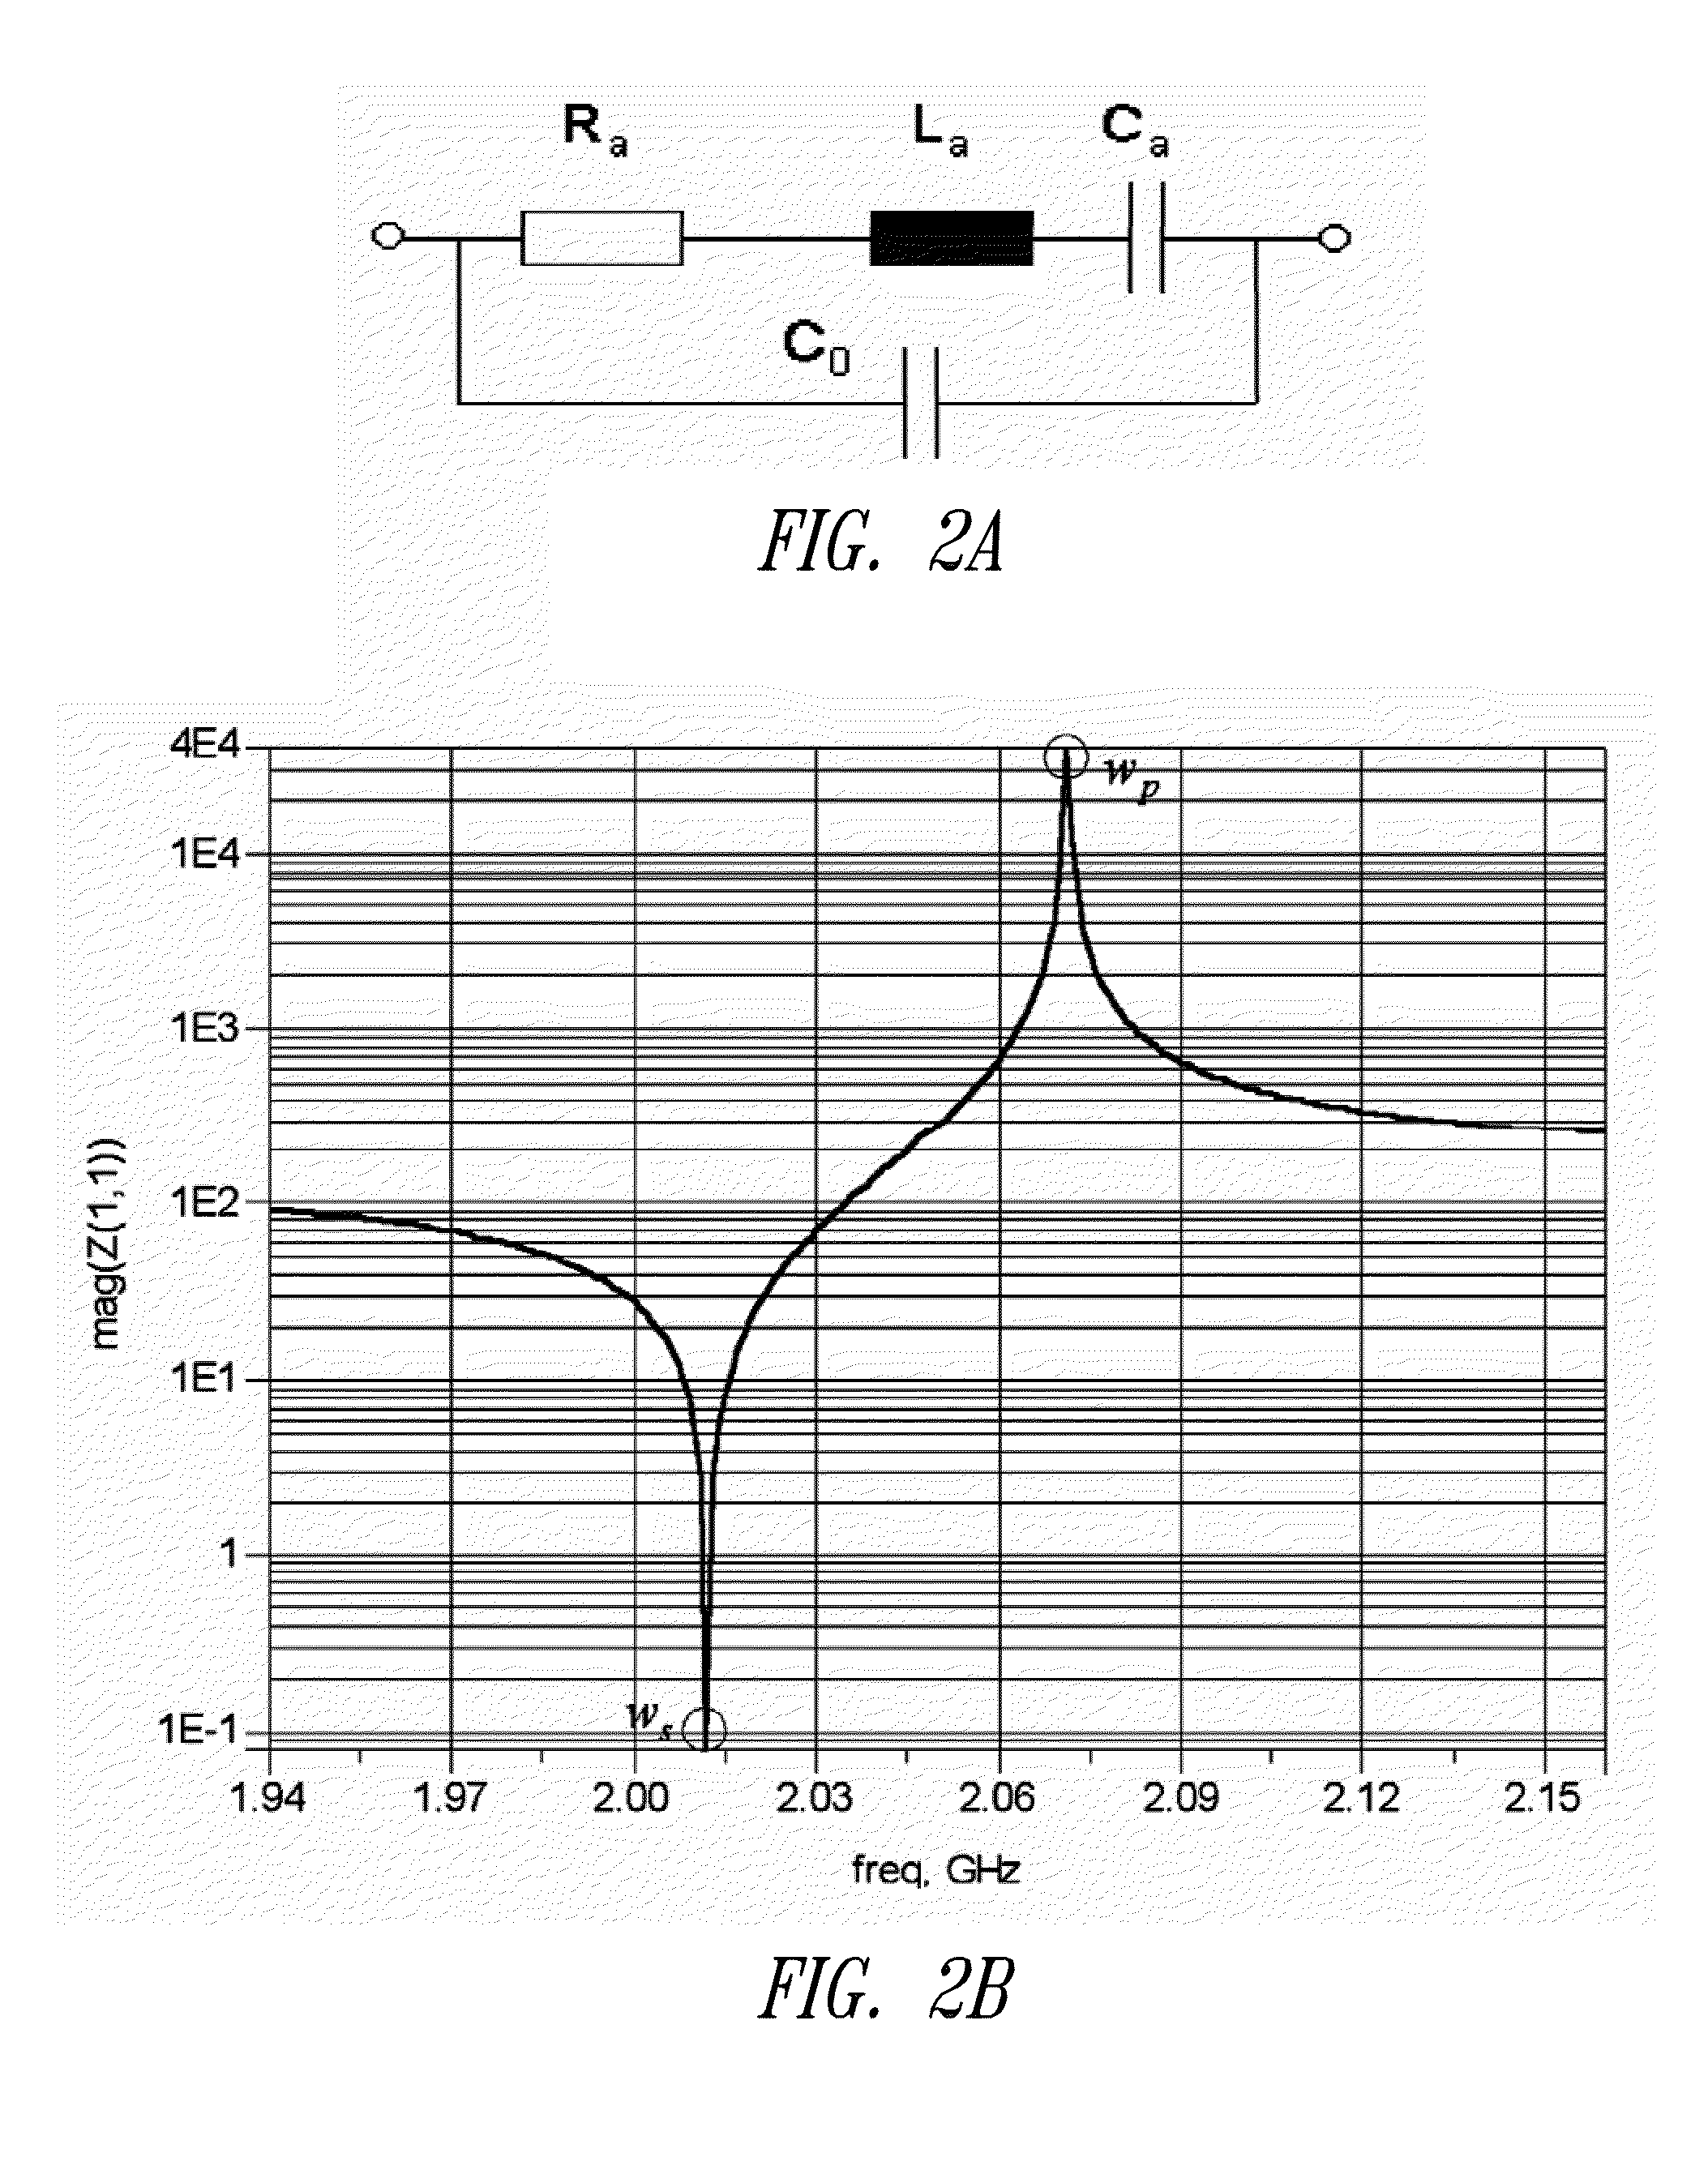 Bulk acoustic wave resonator filter being digitally reconfigurable, with process